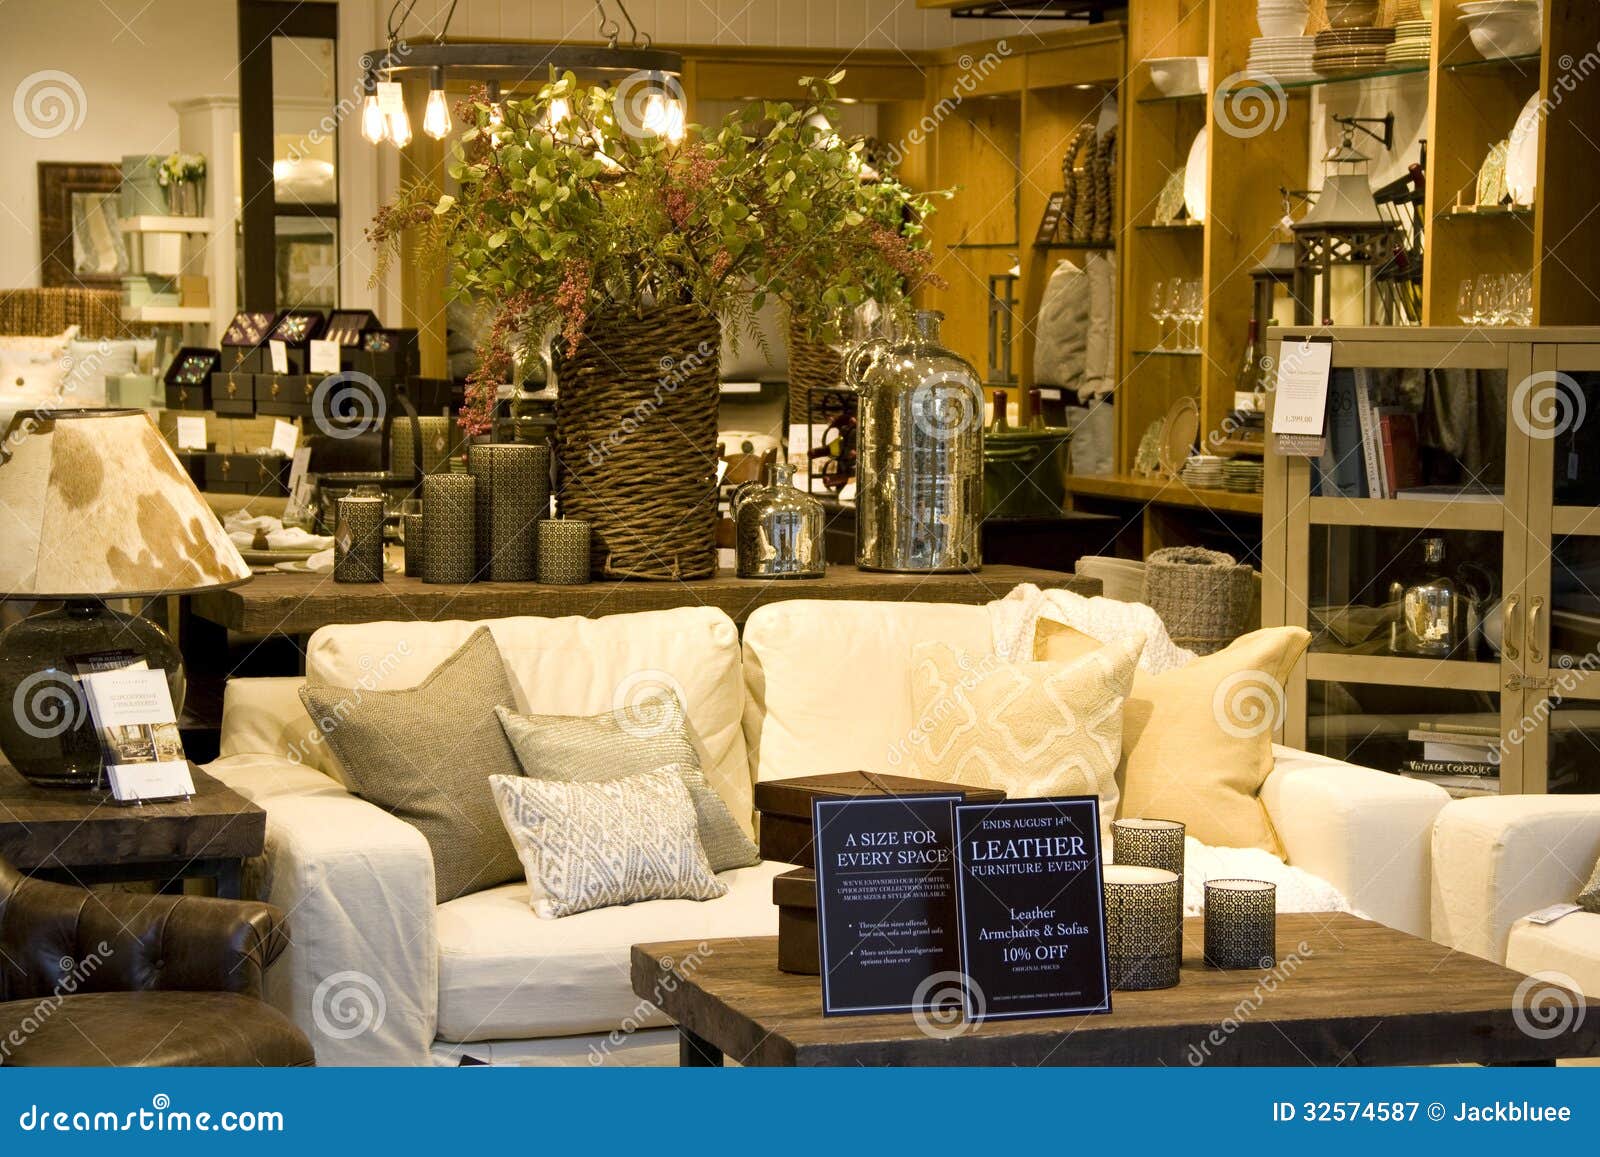 Home And Decor Stores